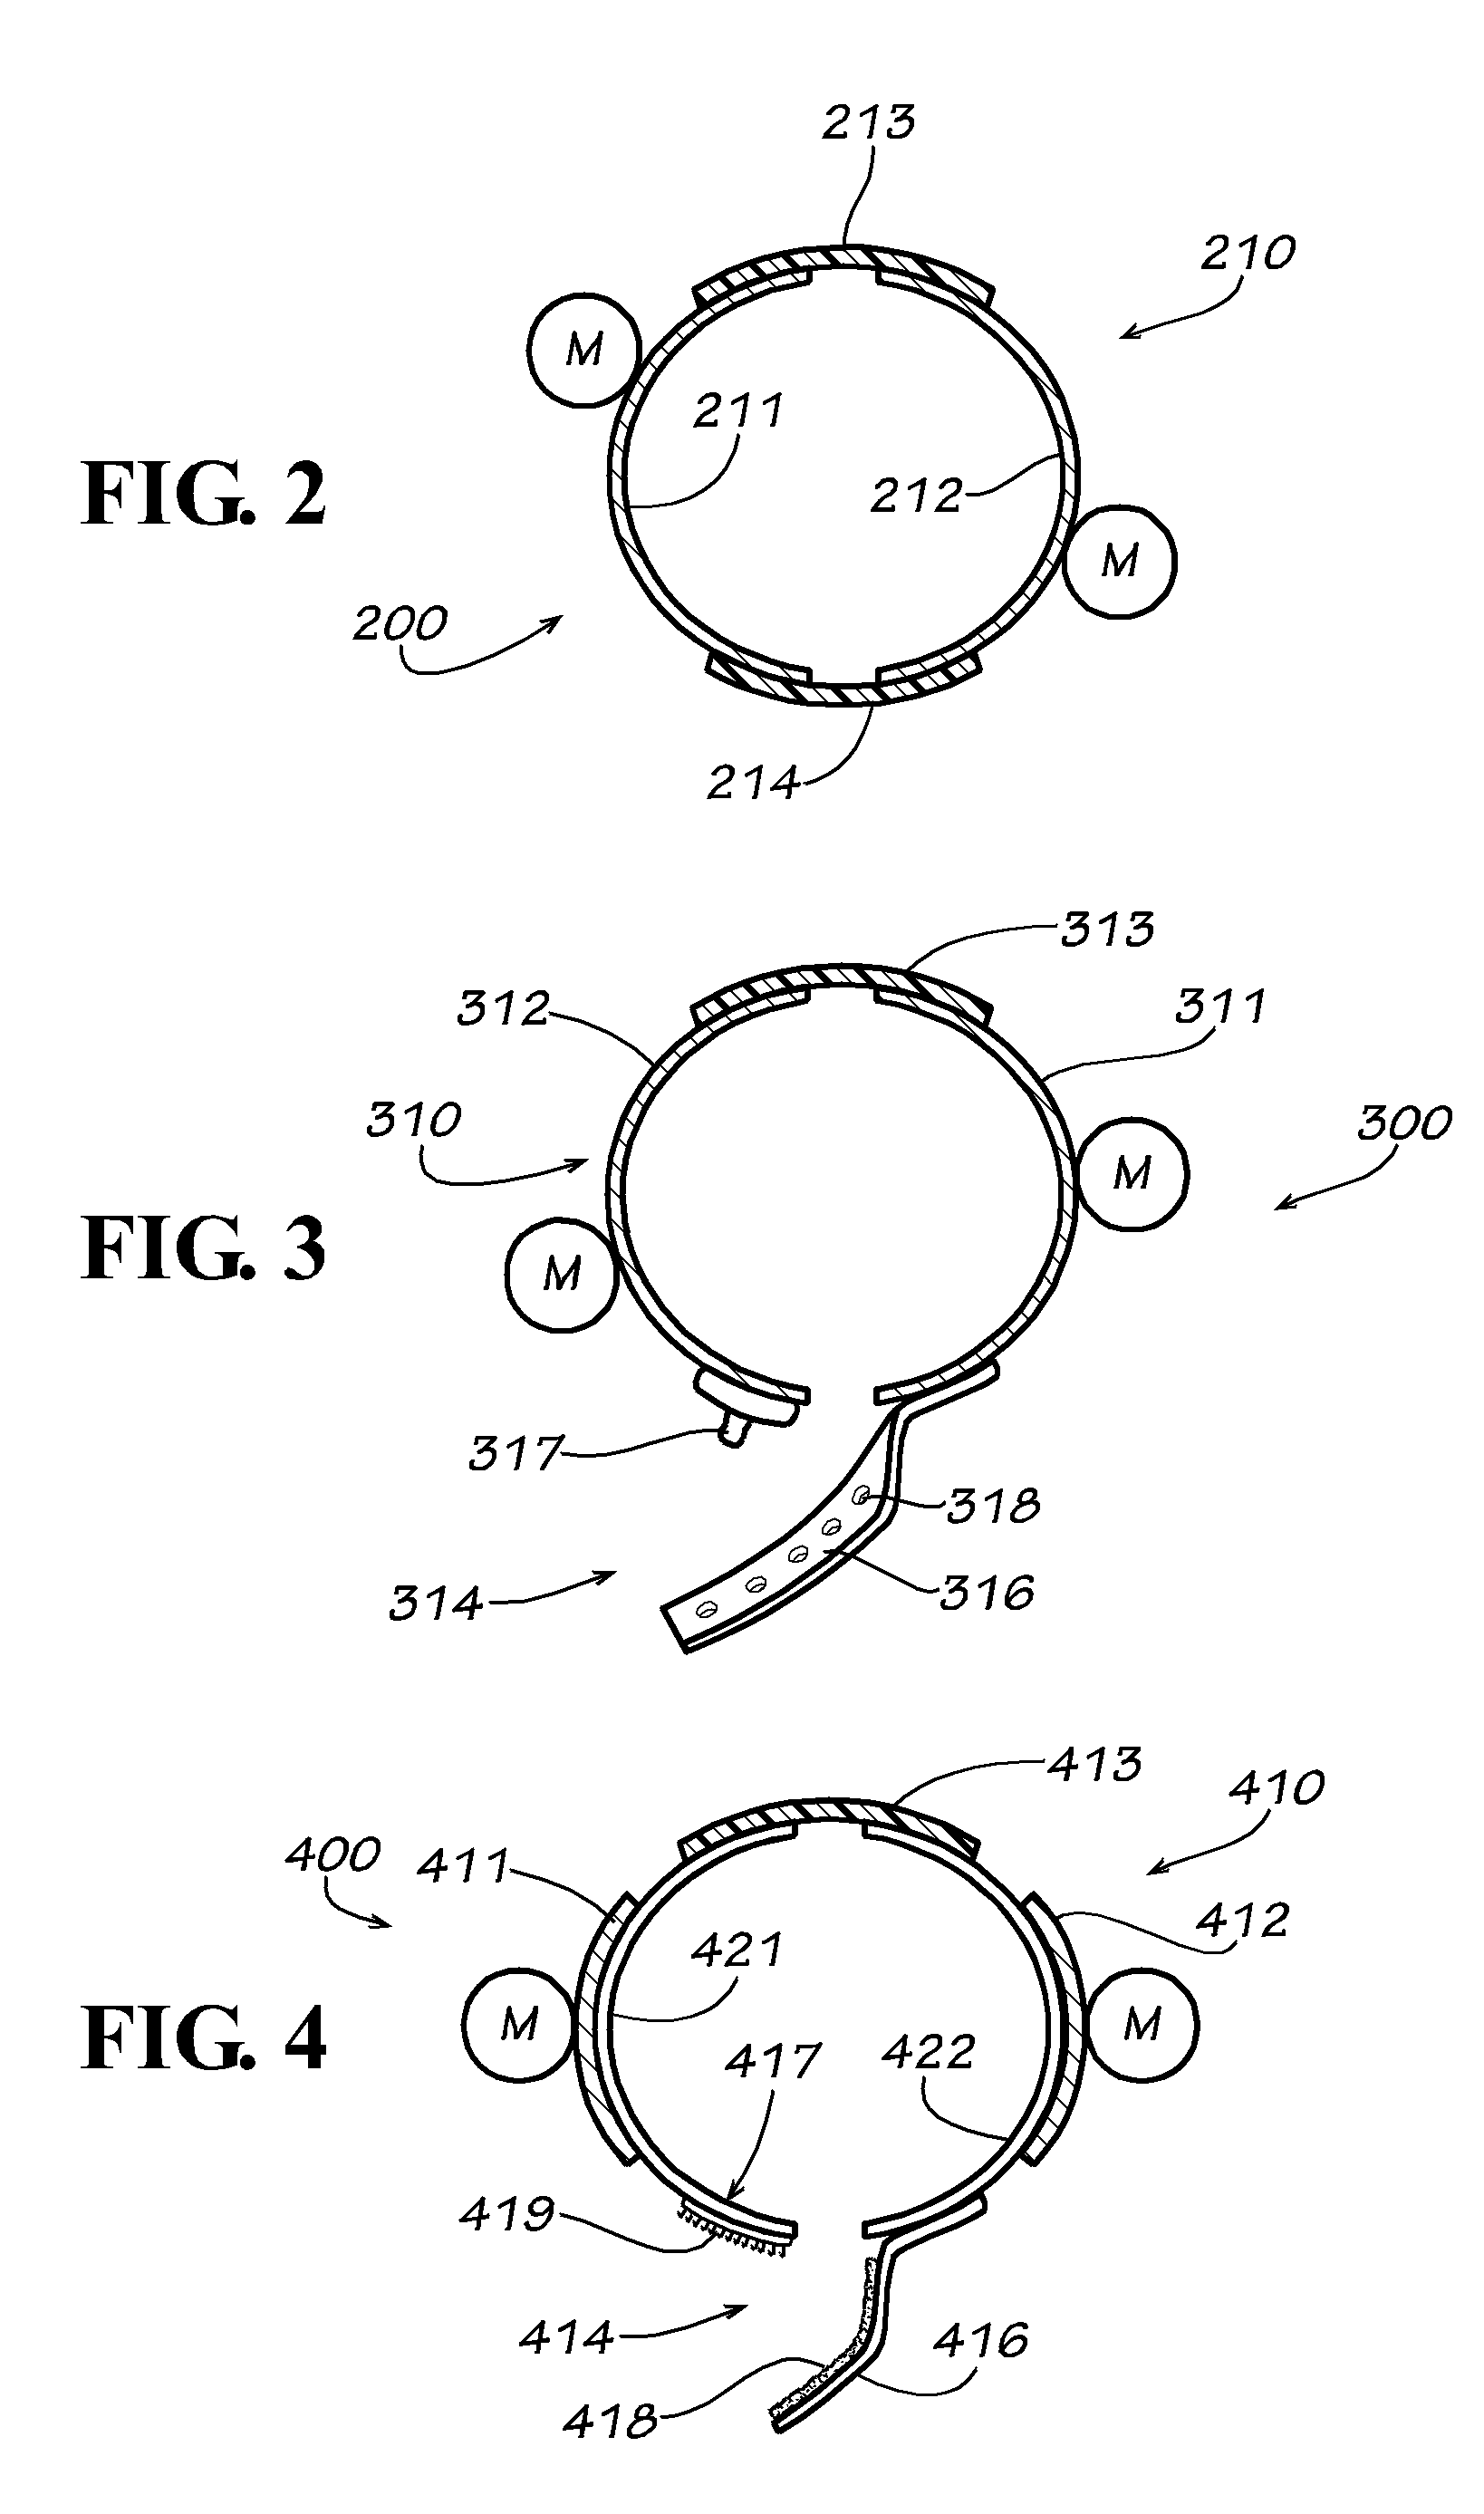 Method and apparatus for reducing/suppressing pain in digits